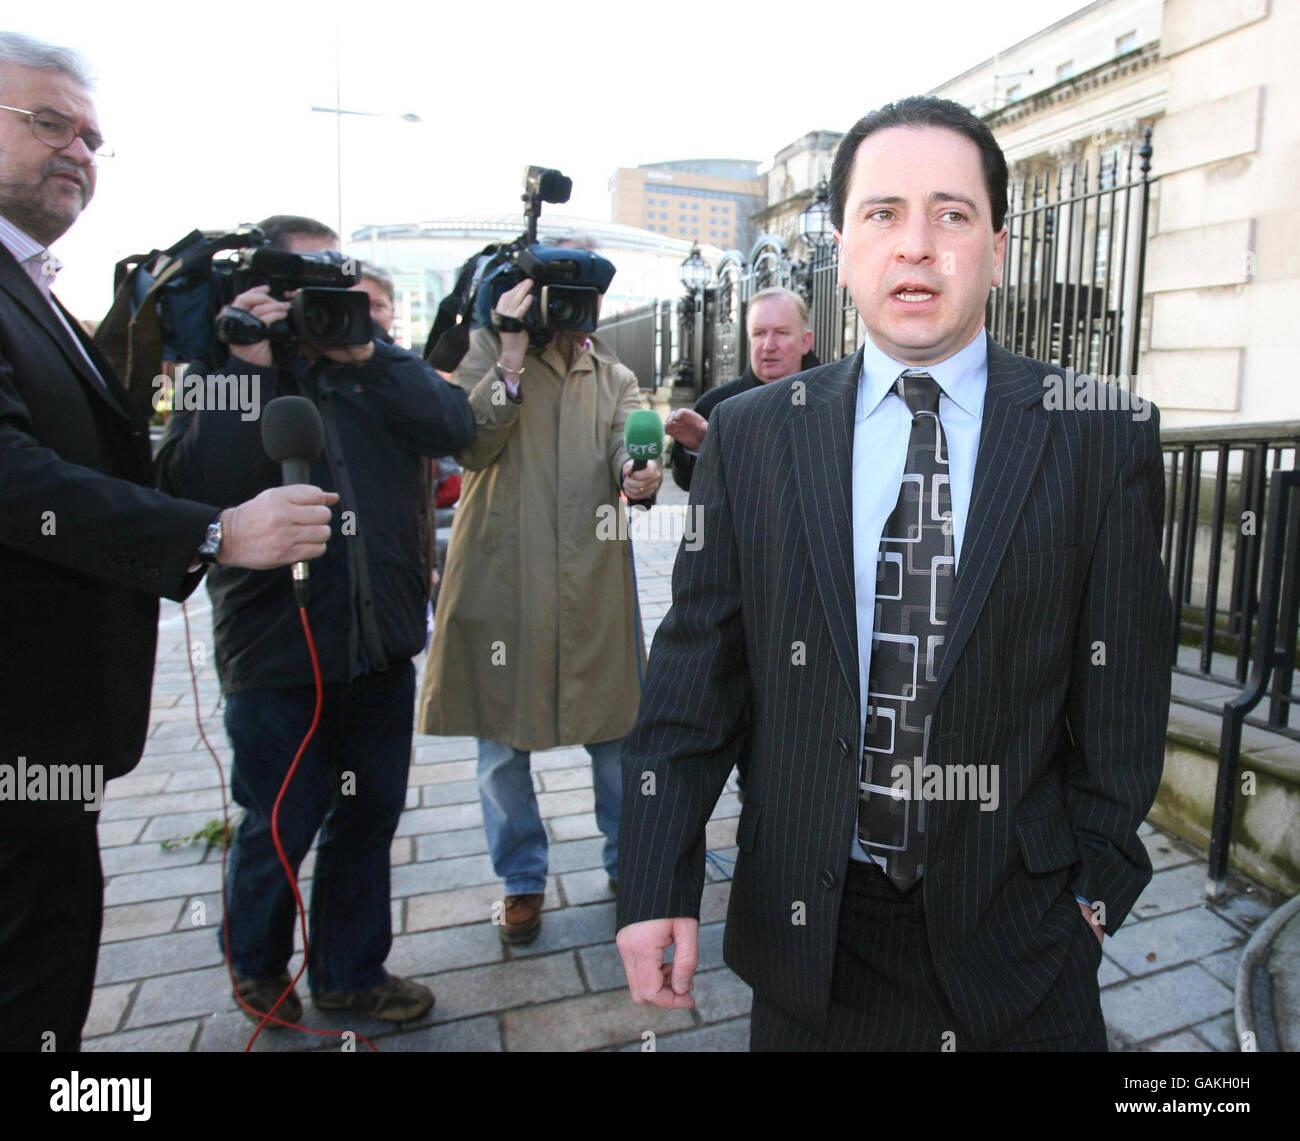 Restaurateur Cieran Converey leaves Belfast High Court. A daily newspaper today won a landmark appeal which overturned the awarding of 25,000 to the Belfast restaurateur over a critical review. Stock Photo